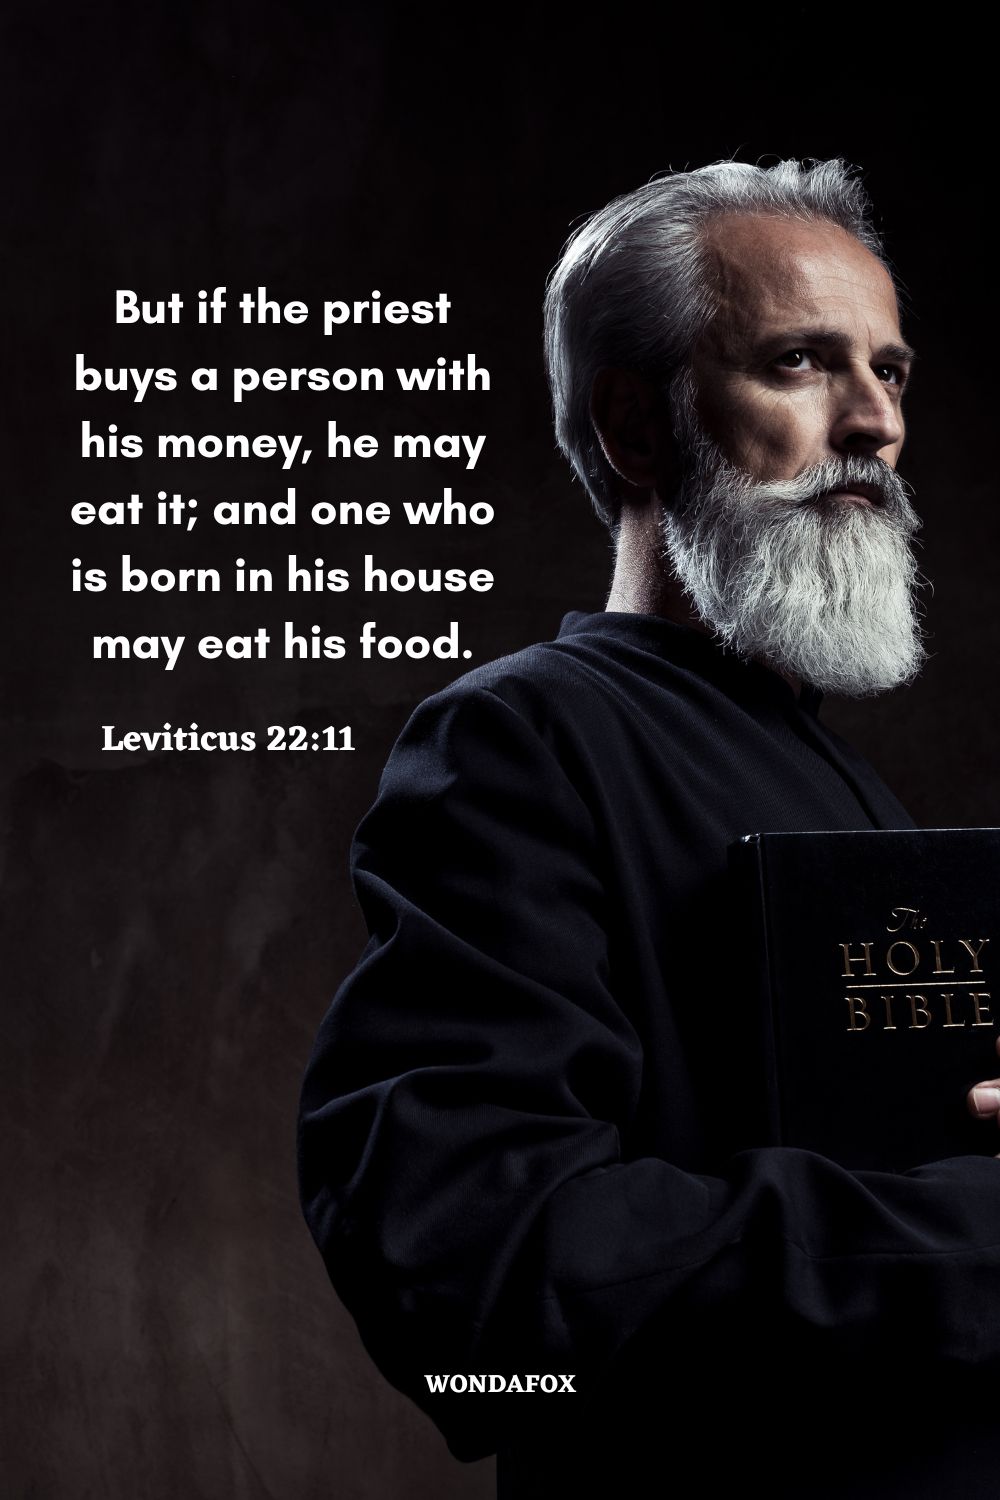 But if the priest buys a person with his money, he may eat it; and one who is born in his house may eat his food.
Leviticus 22:11